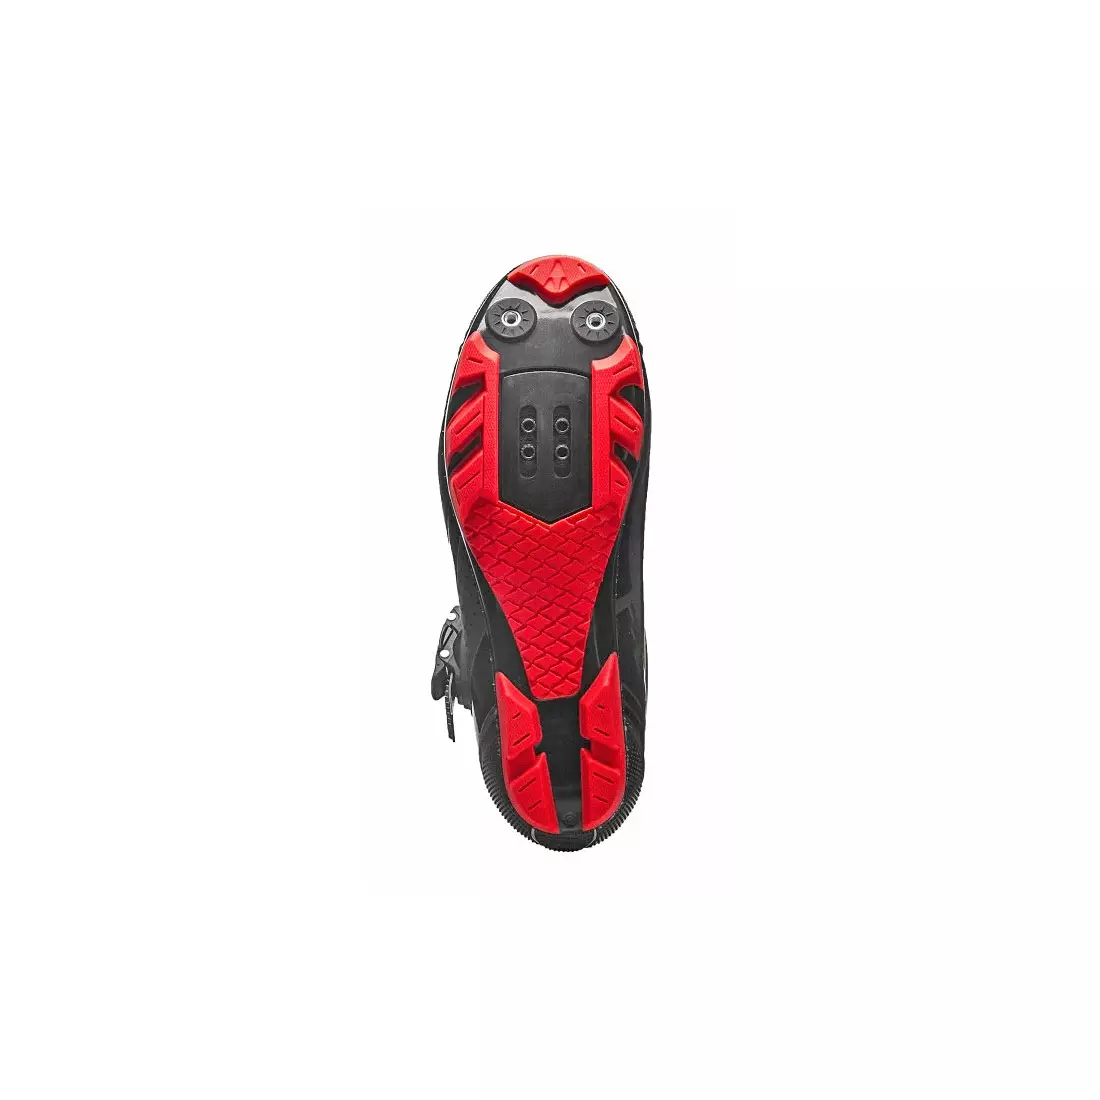 FLR F-65 MTB cycling shoes, black and red